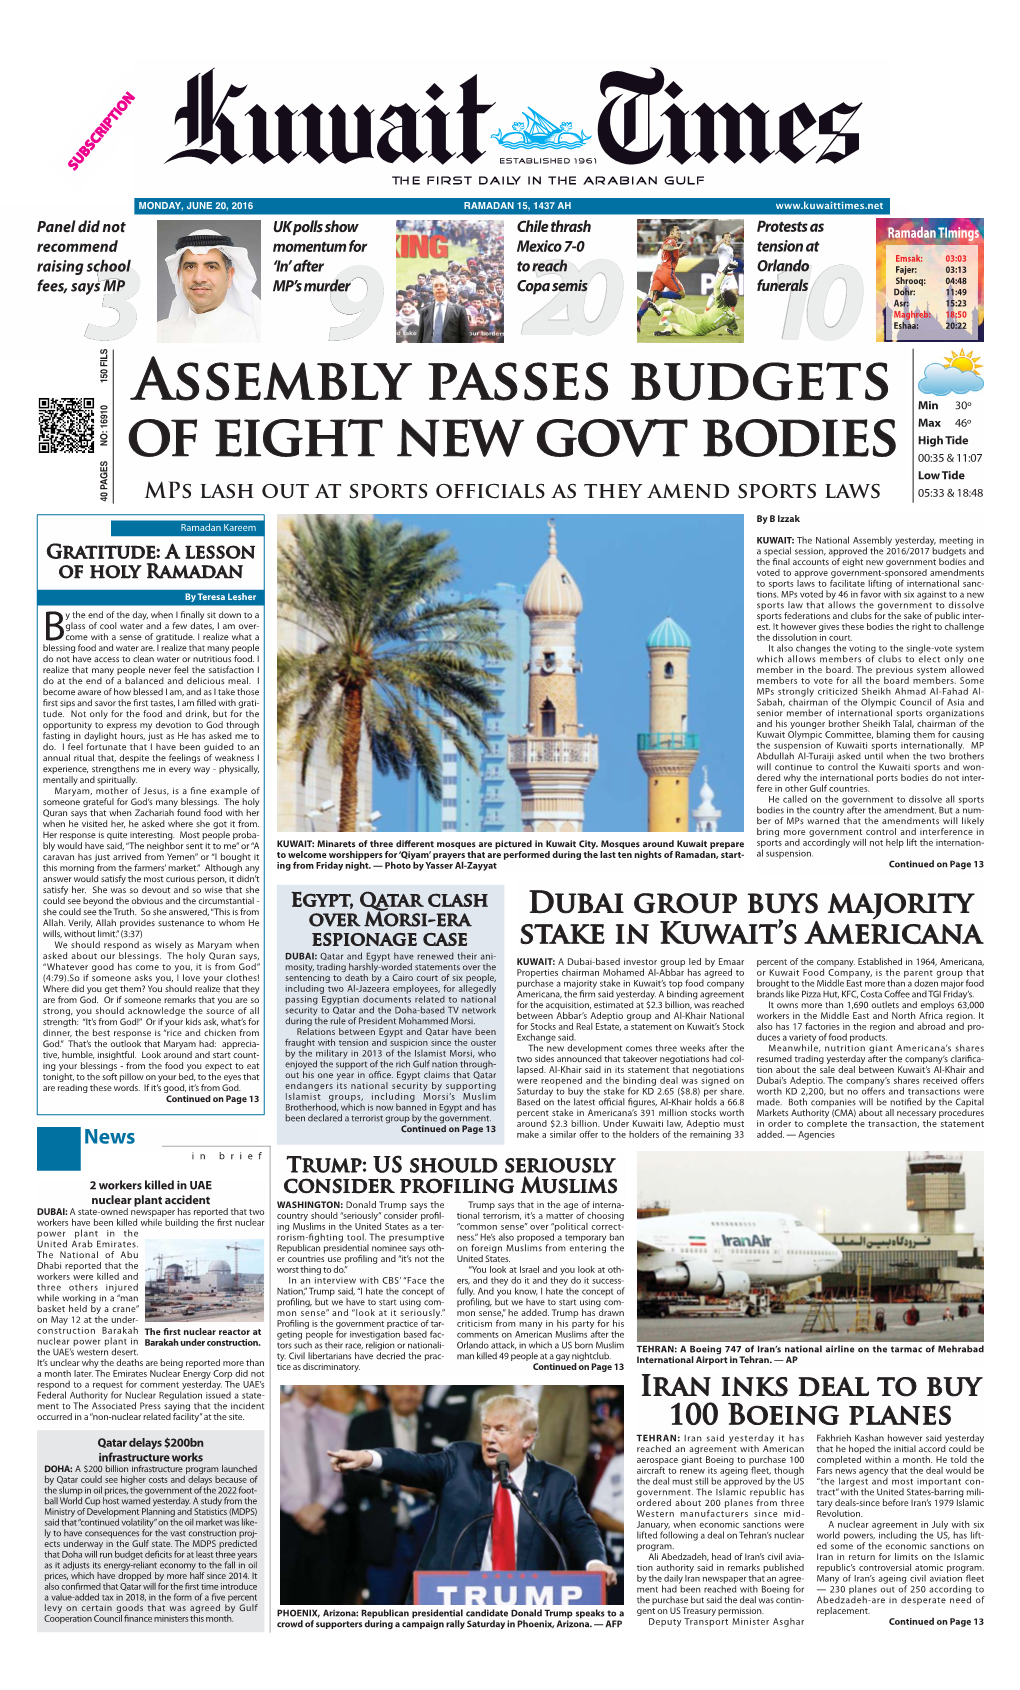 Assembly Passes Budgets of Eight New Govt Bodies